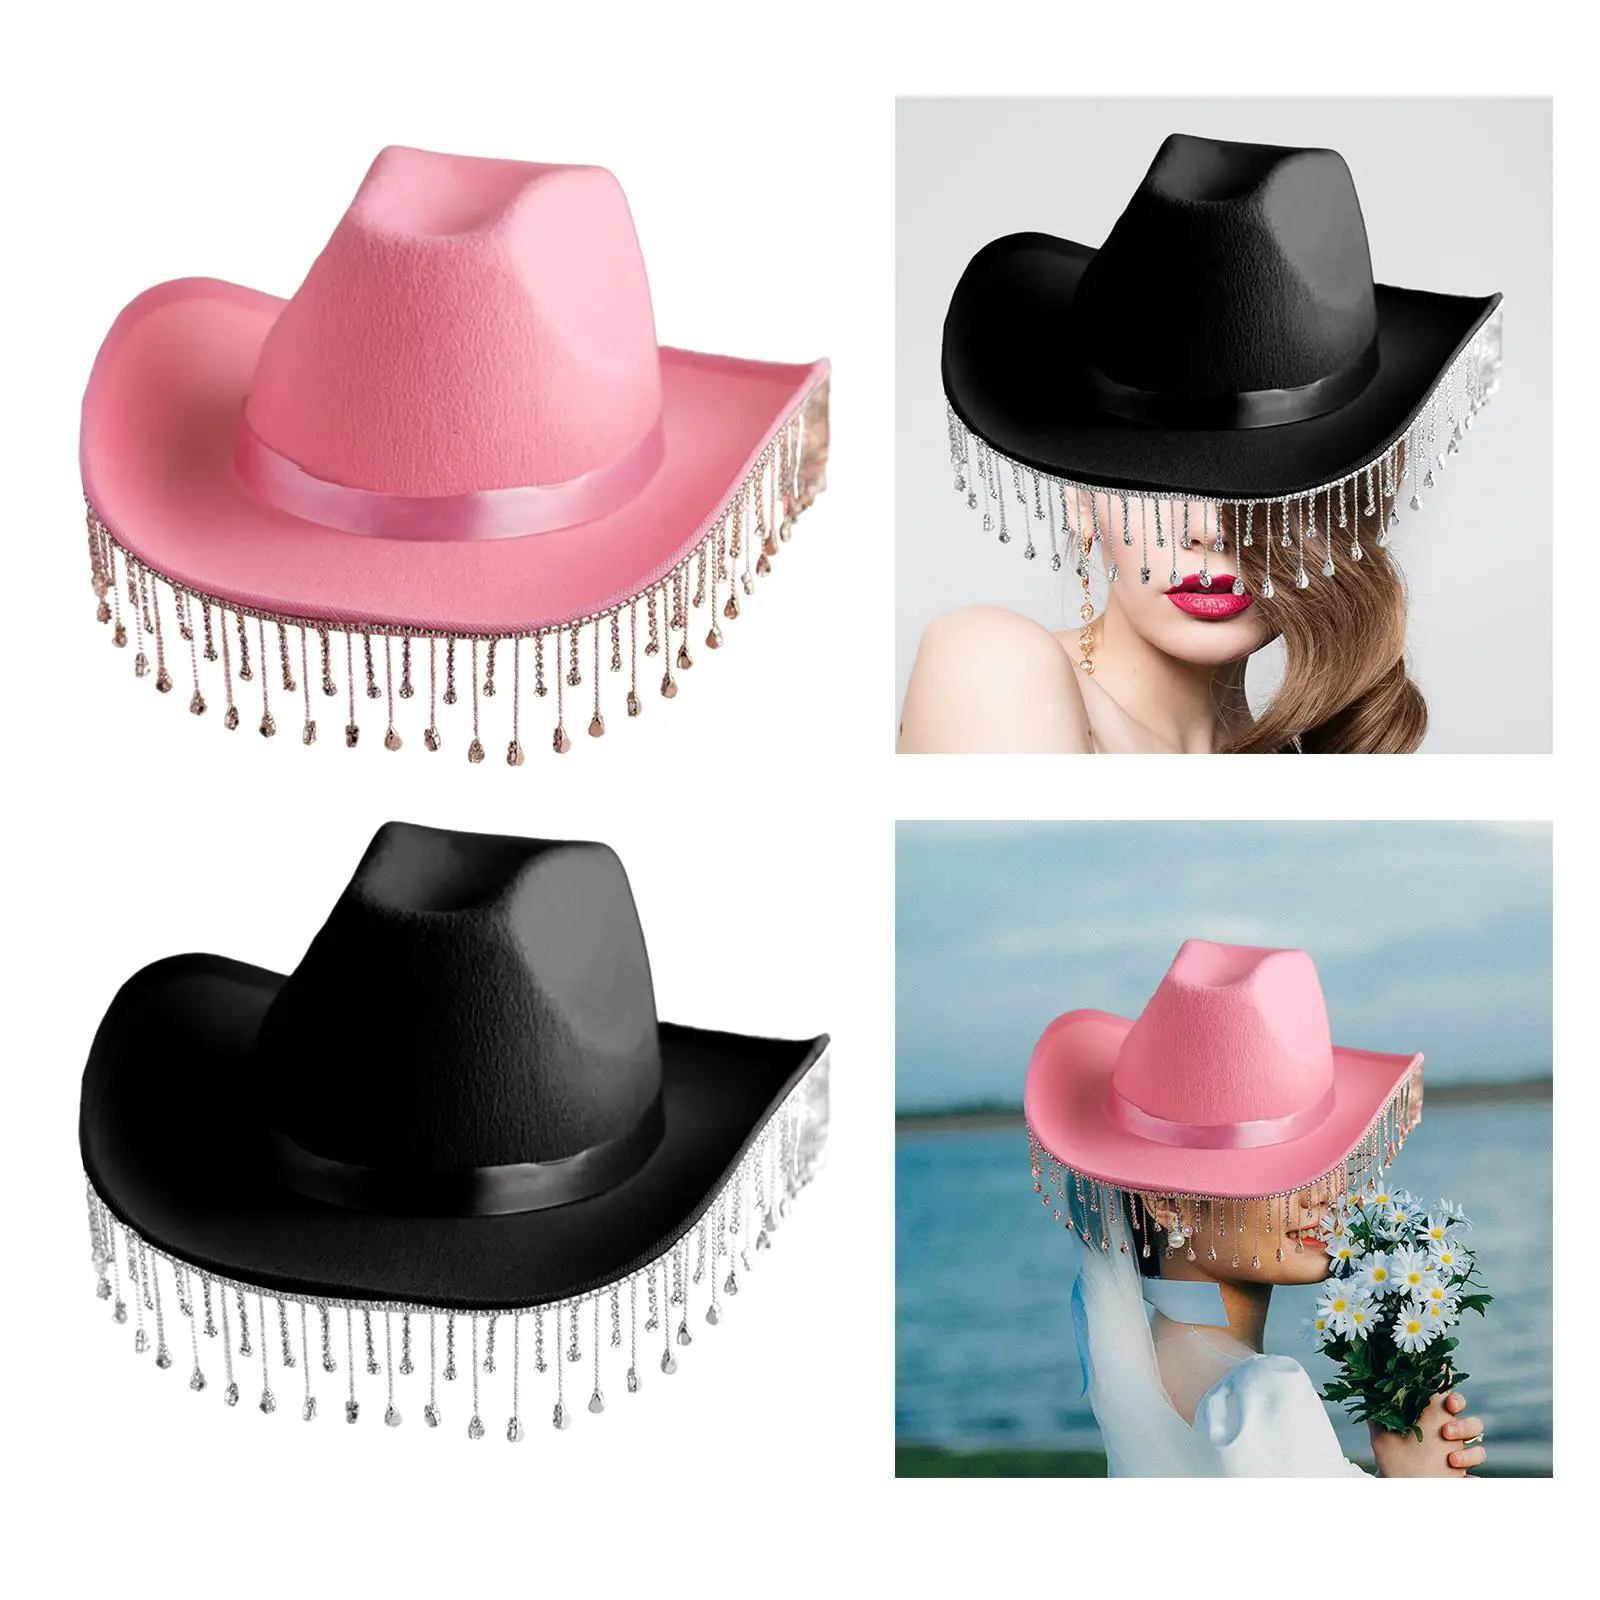 Rhinestone Bridal Cowgirl Hat Cowboy Hat Breathable Lightweight for Costumes Halloween Decor Music Festival Concerts Party Women